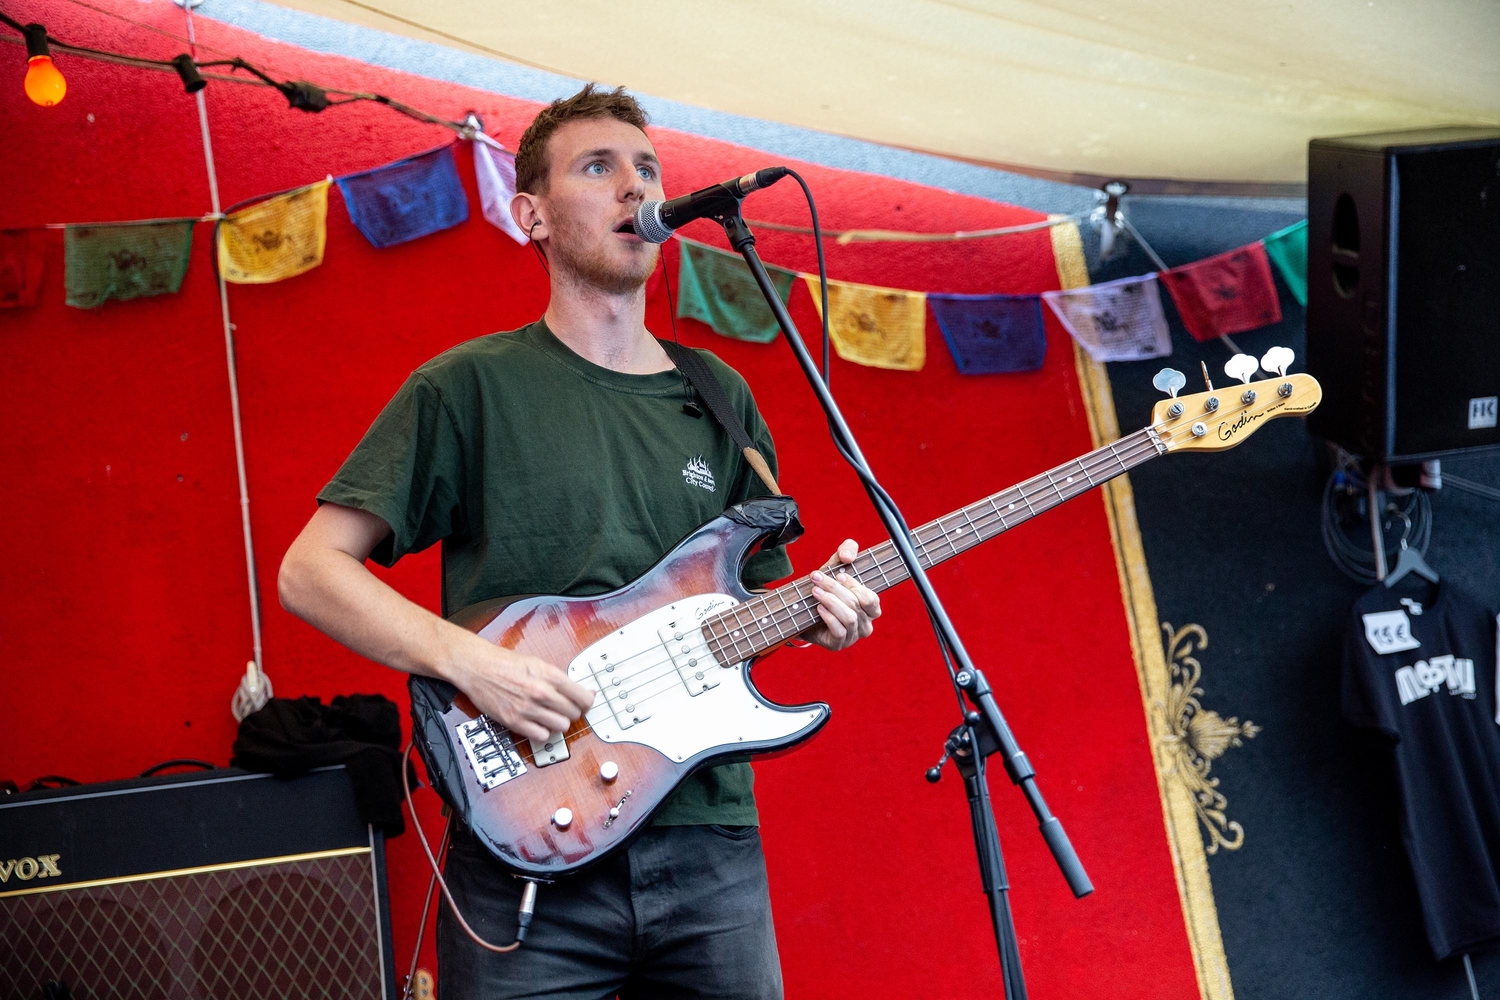 Sports Team close out Reeperbahn 2019 with a high octane set on the DIY Stage